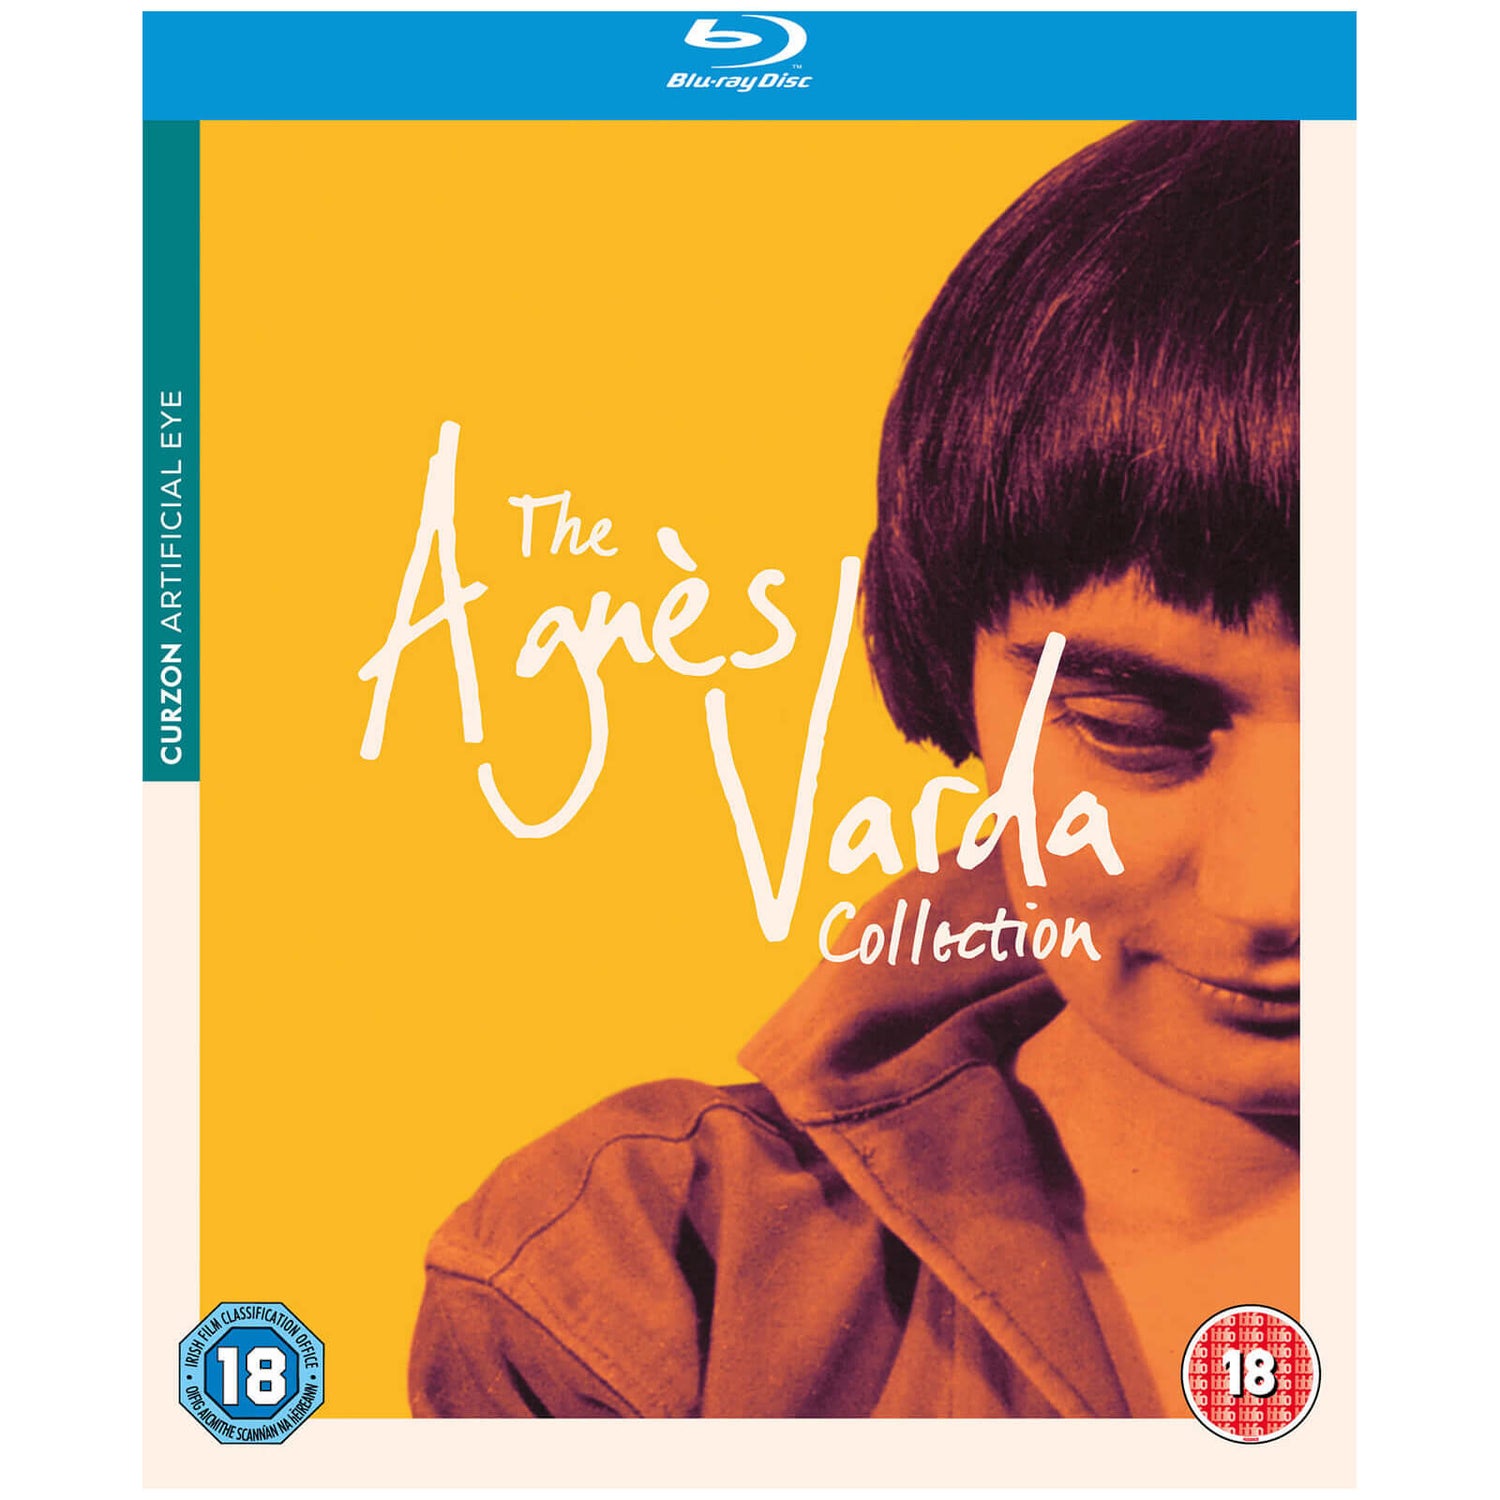 The Agnes Varda Collection